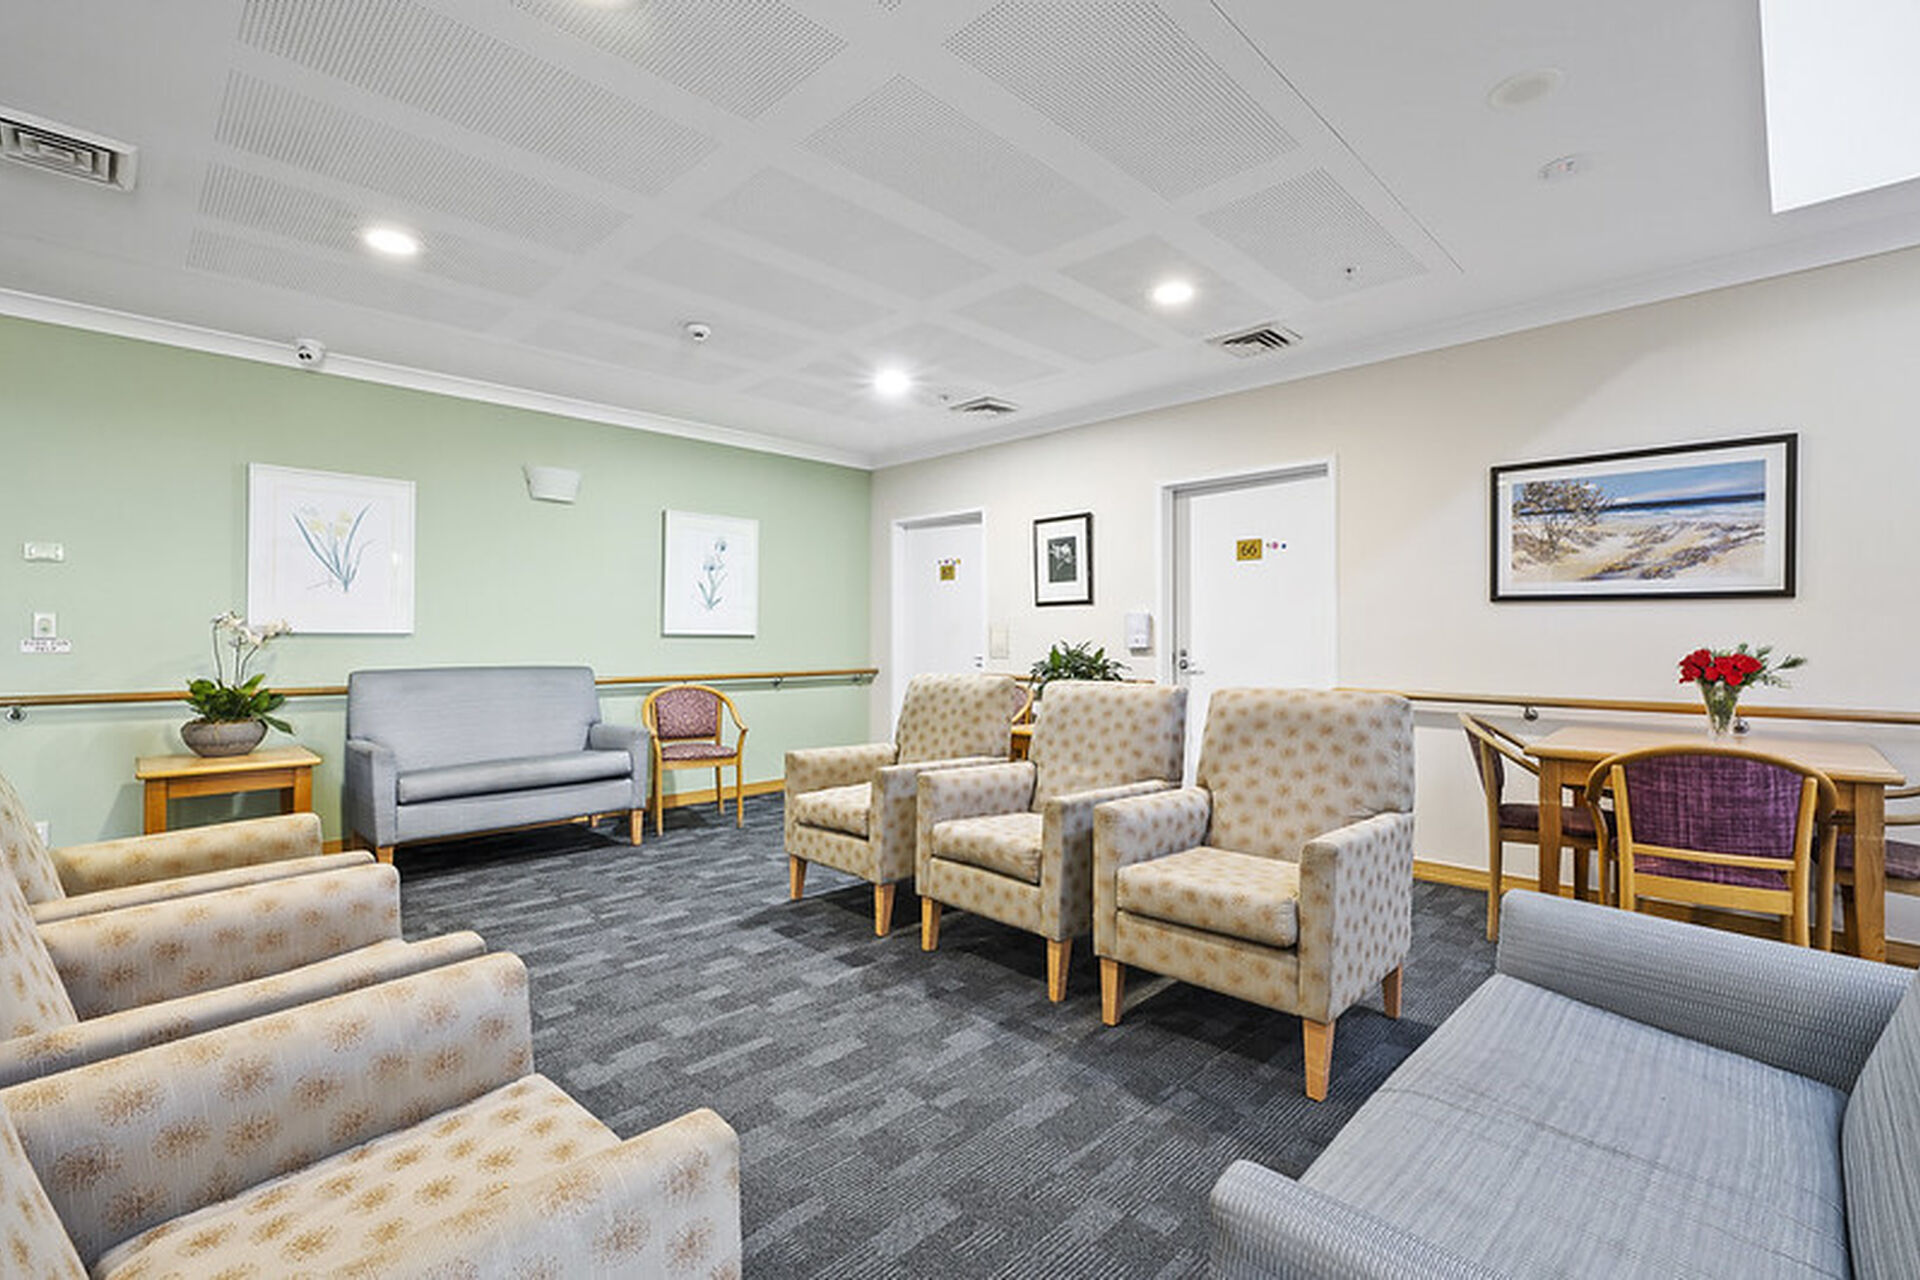 communal sitting space for aged care residents to socialise at baptistcare blue hills manor residential aged care home in prestons nsw